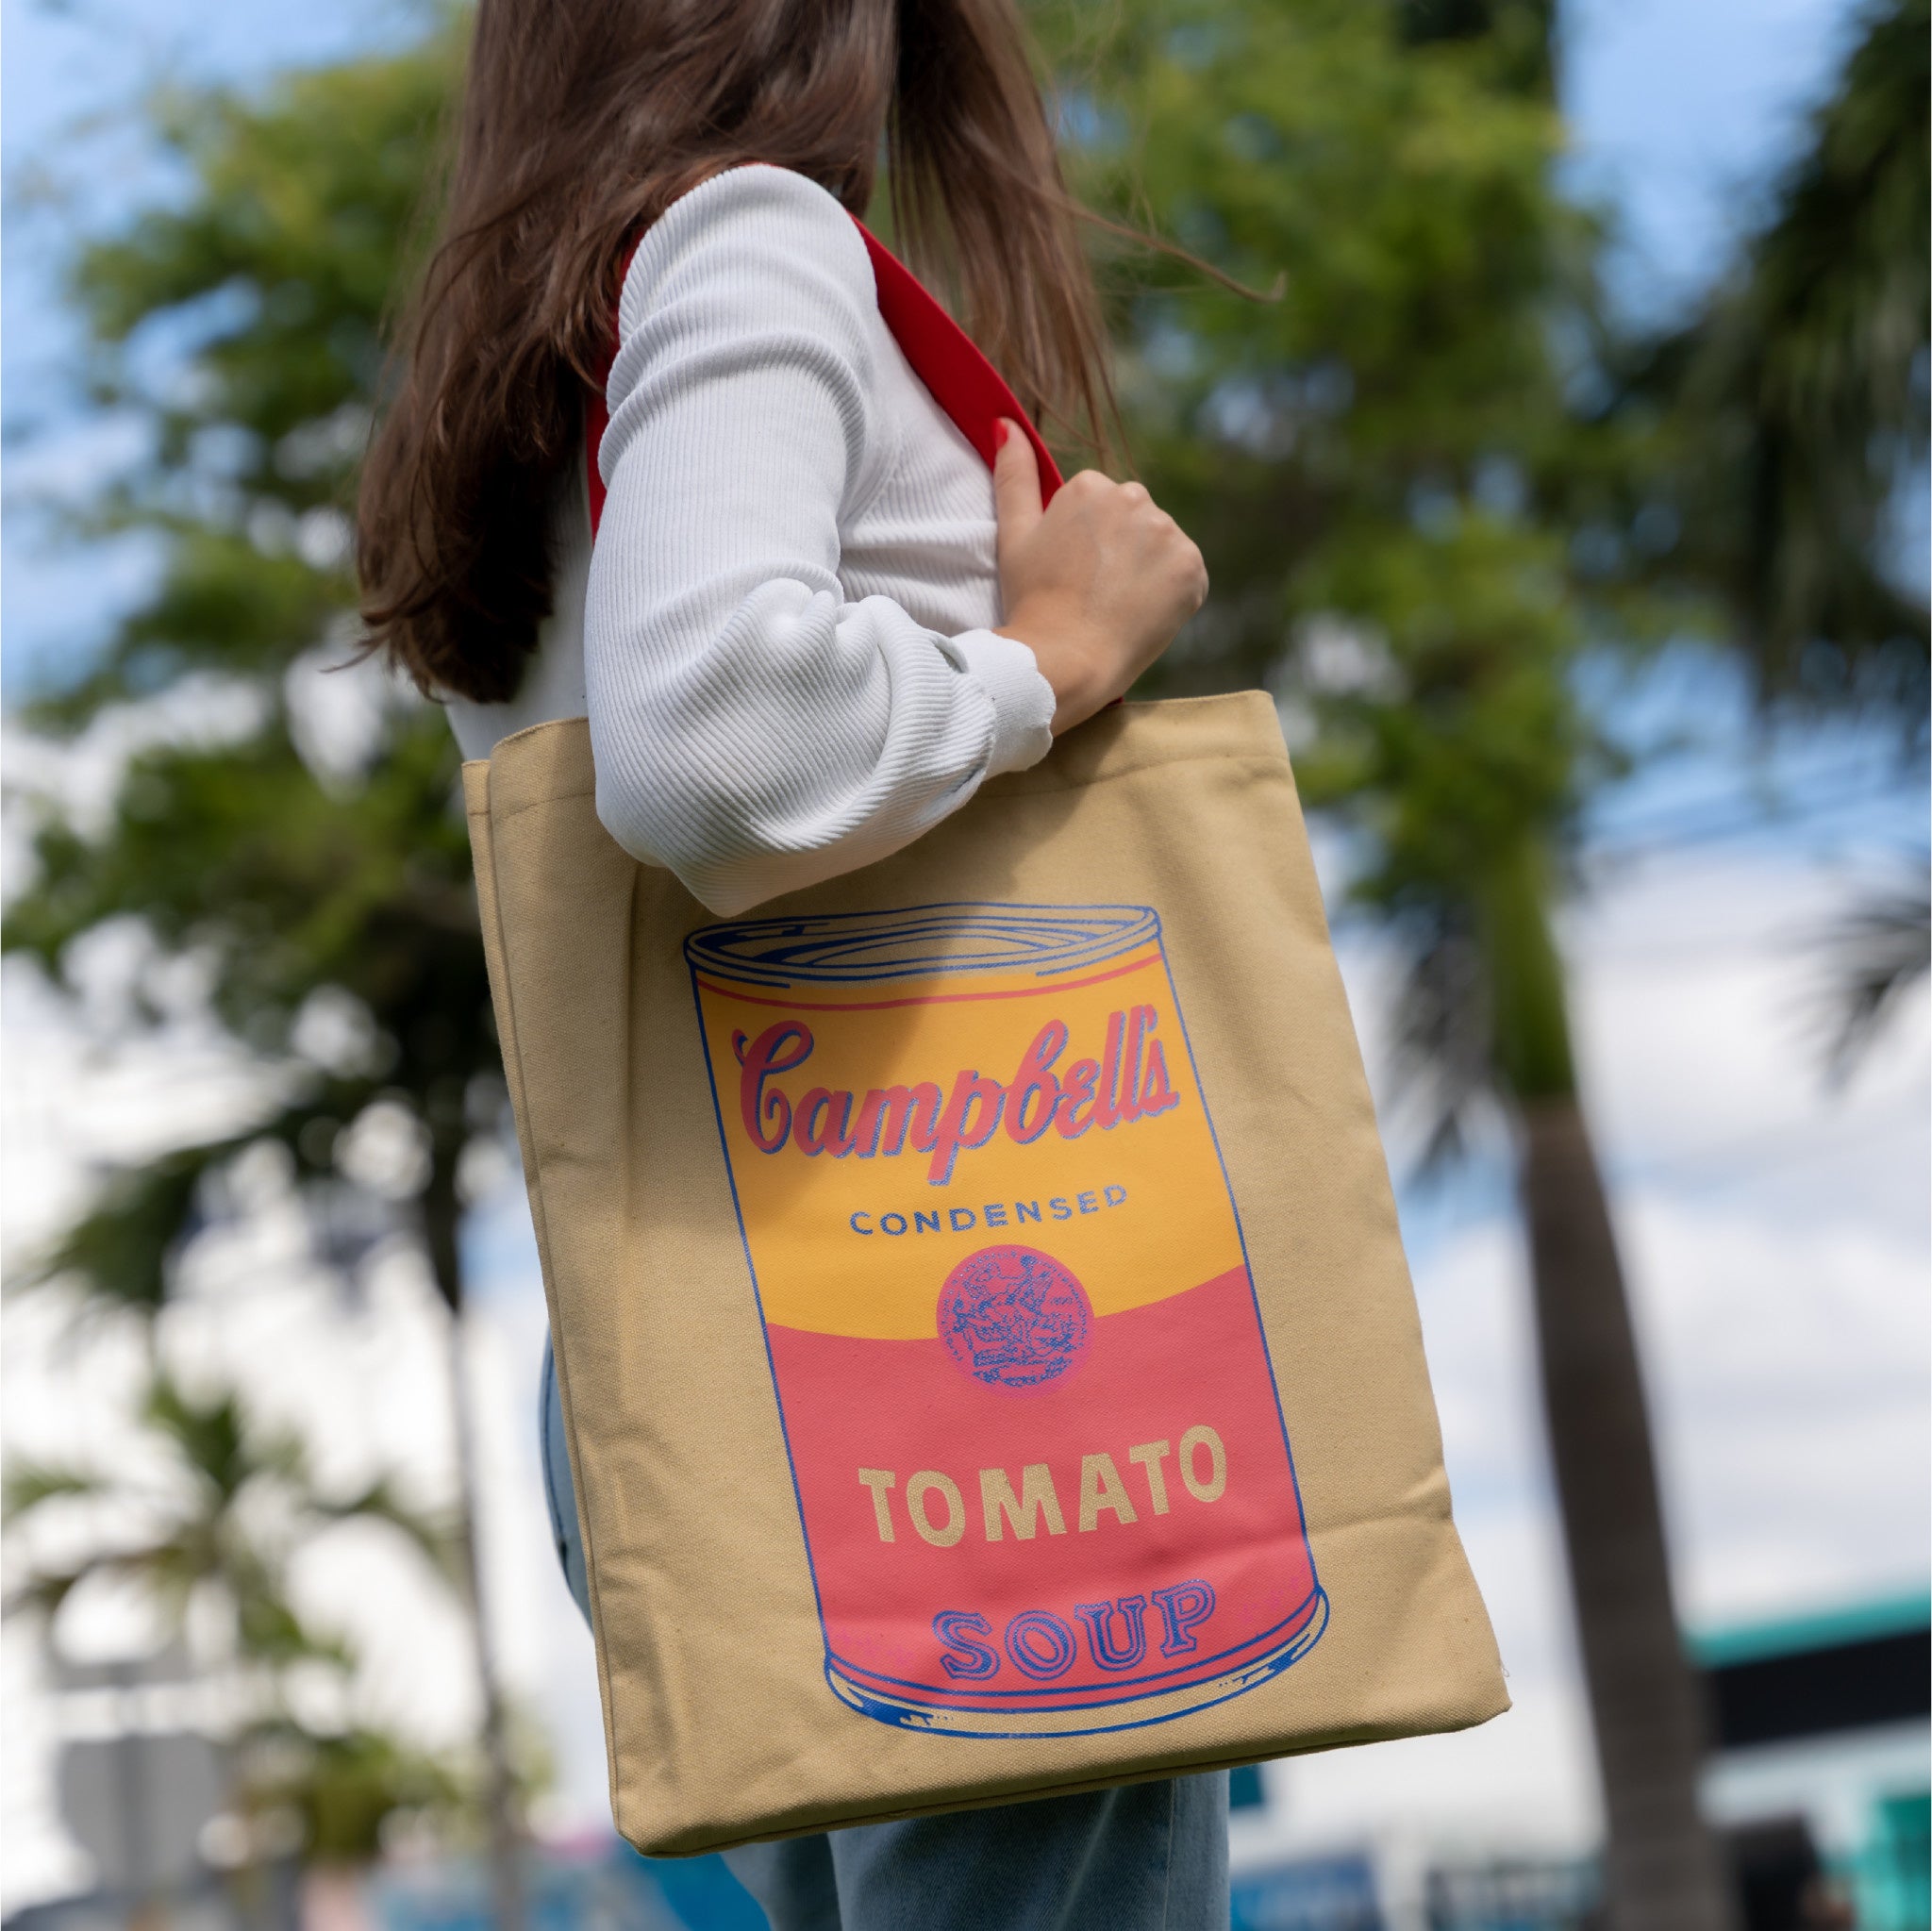 Andy Warhol CAMPBELL'S SOUP Tote Bag - Wynwood Walls Shop